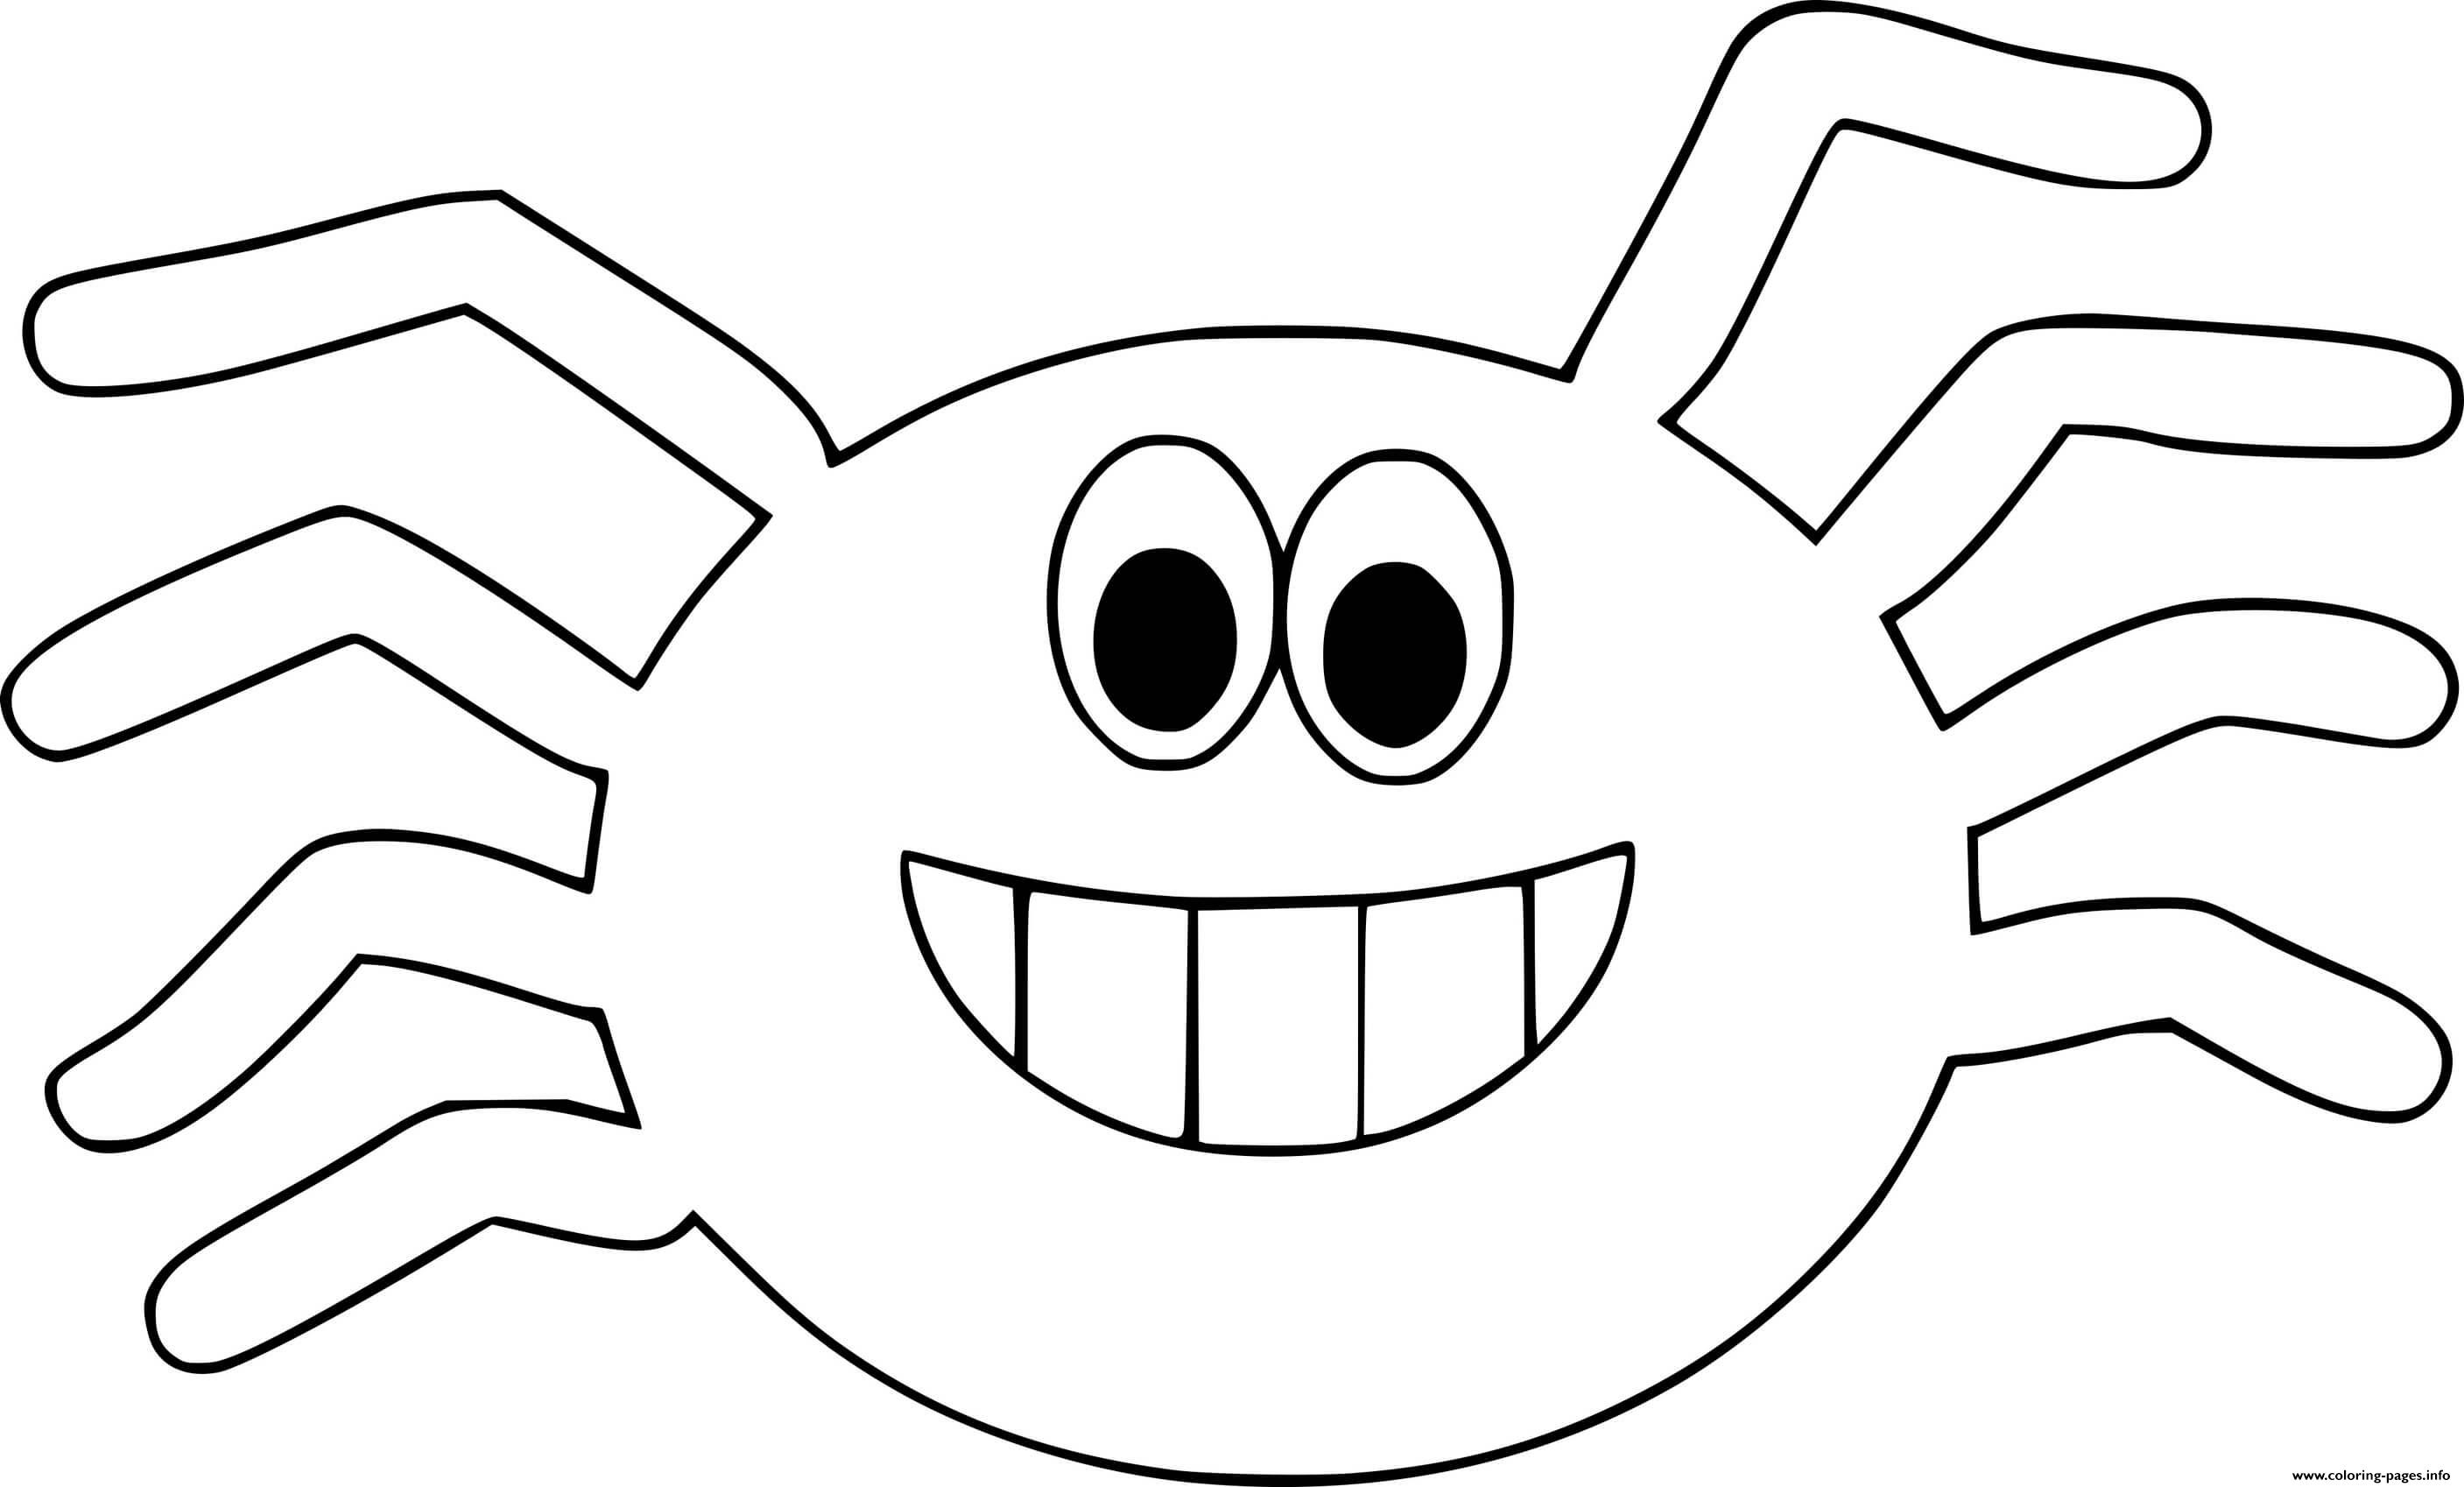 Cartoon Smiling Spider Outline coloring